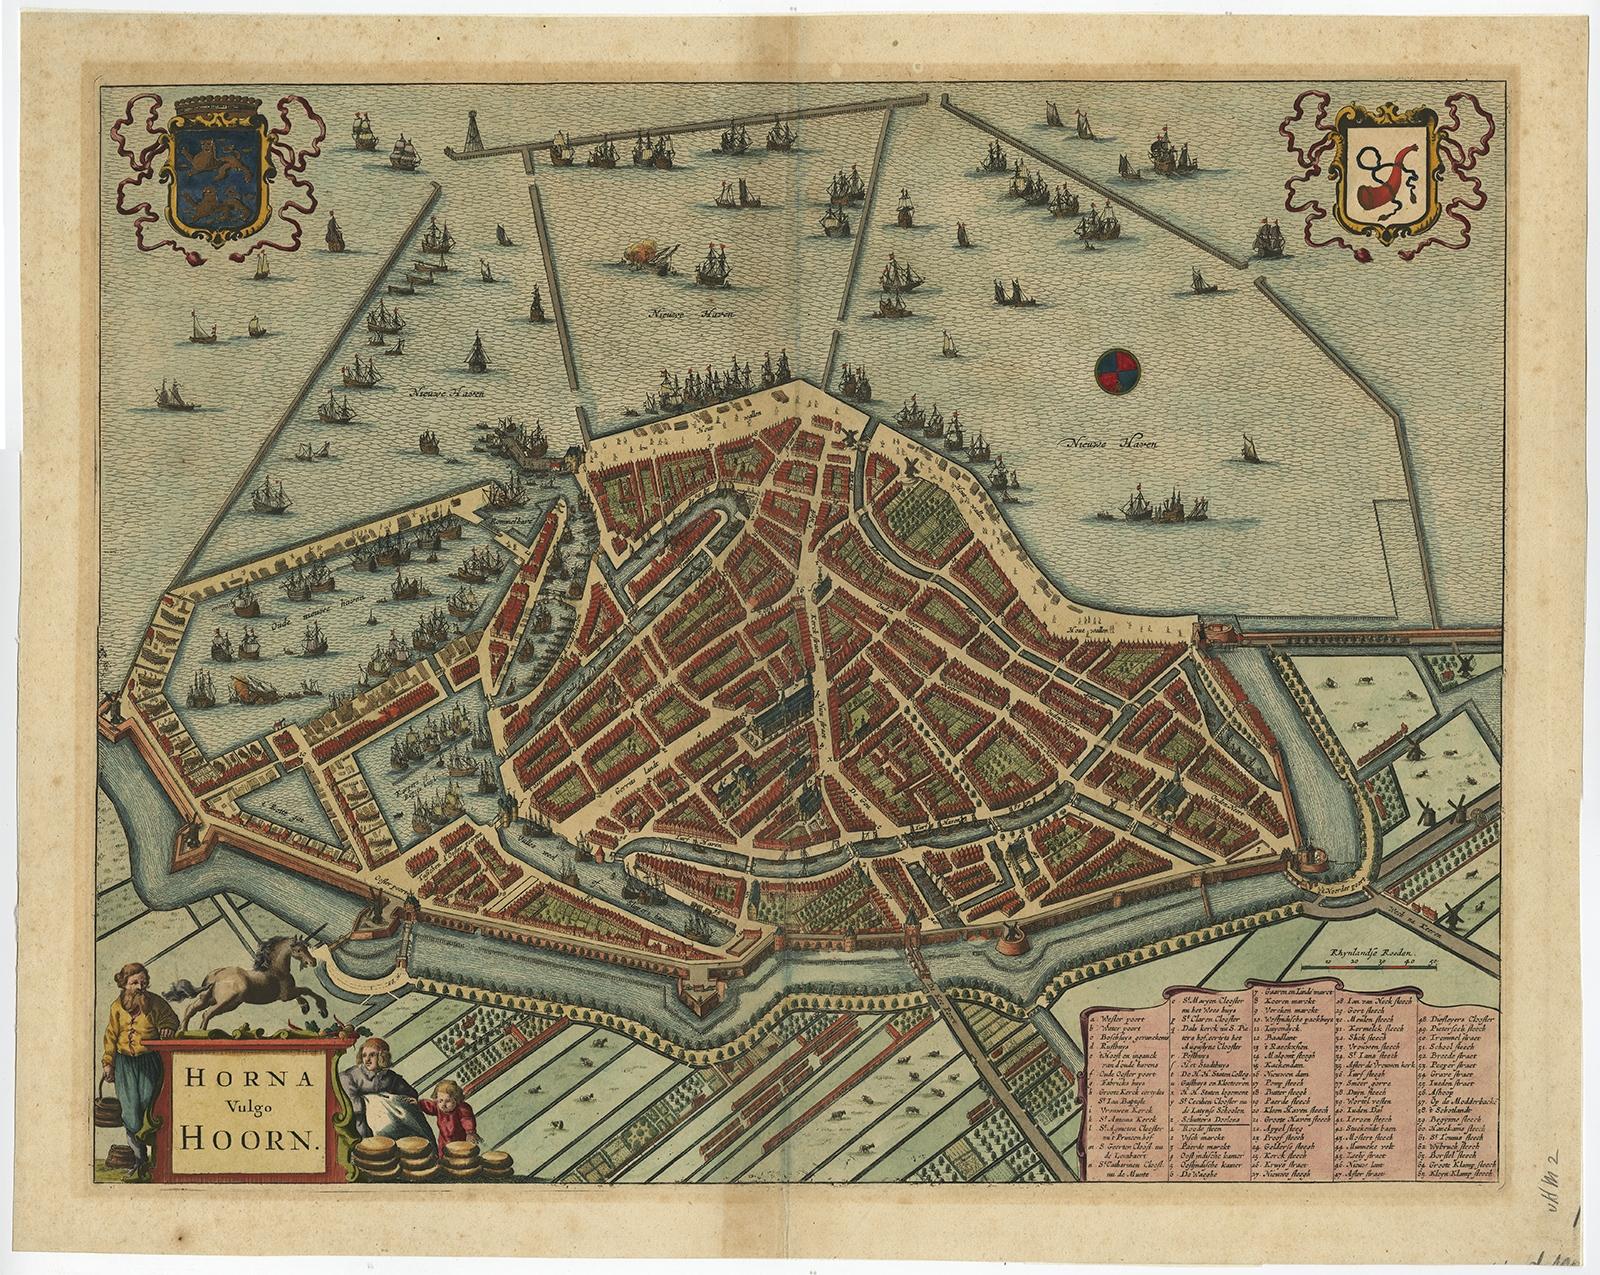 Antique map titled 'Horna vulgo Hoorn'. 

Bird's eye view plan of Hoorn, The Netherlands. With title cartouche, coats of arms and key. From an atlas published by De Wit, ca. 1698-1710 State: 2ns state, with the scalebar in the lower right. Ref: